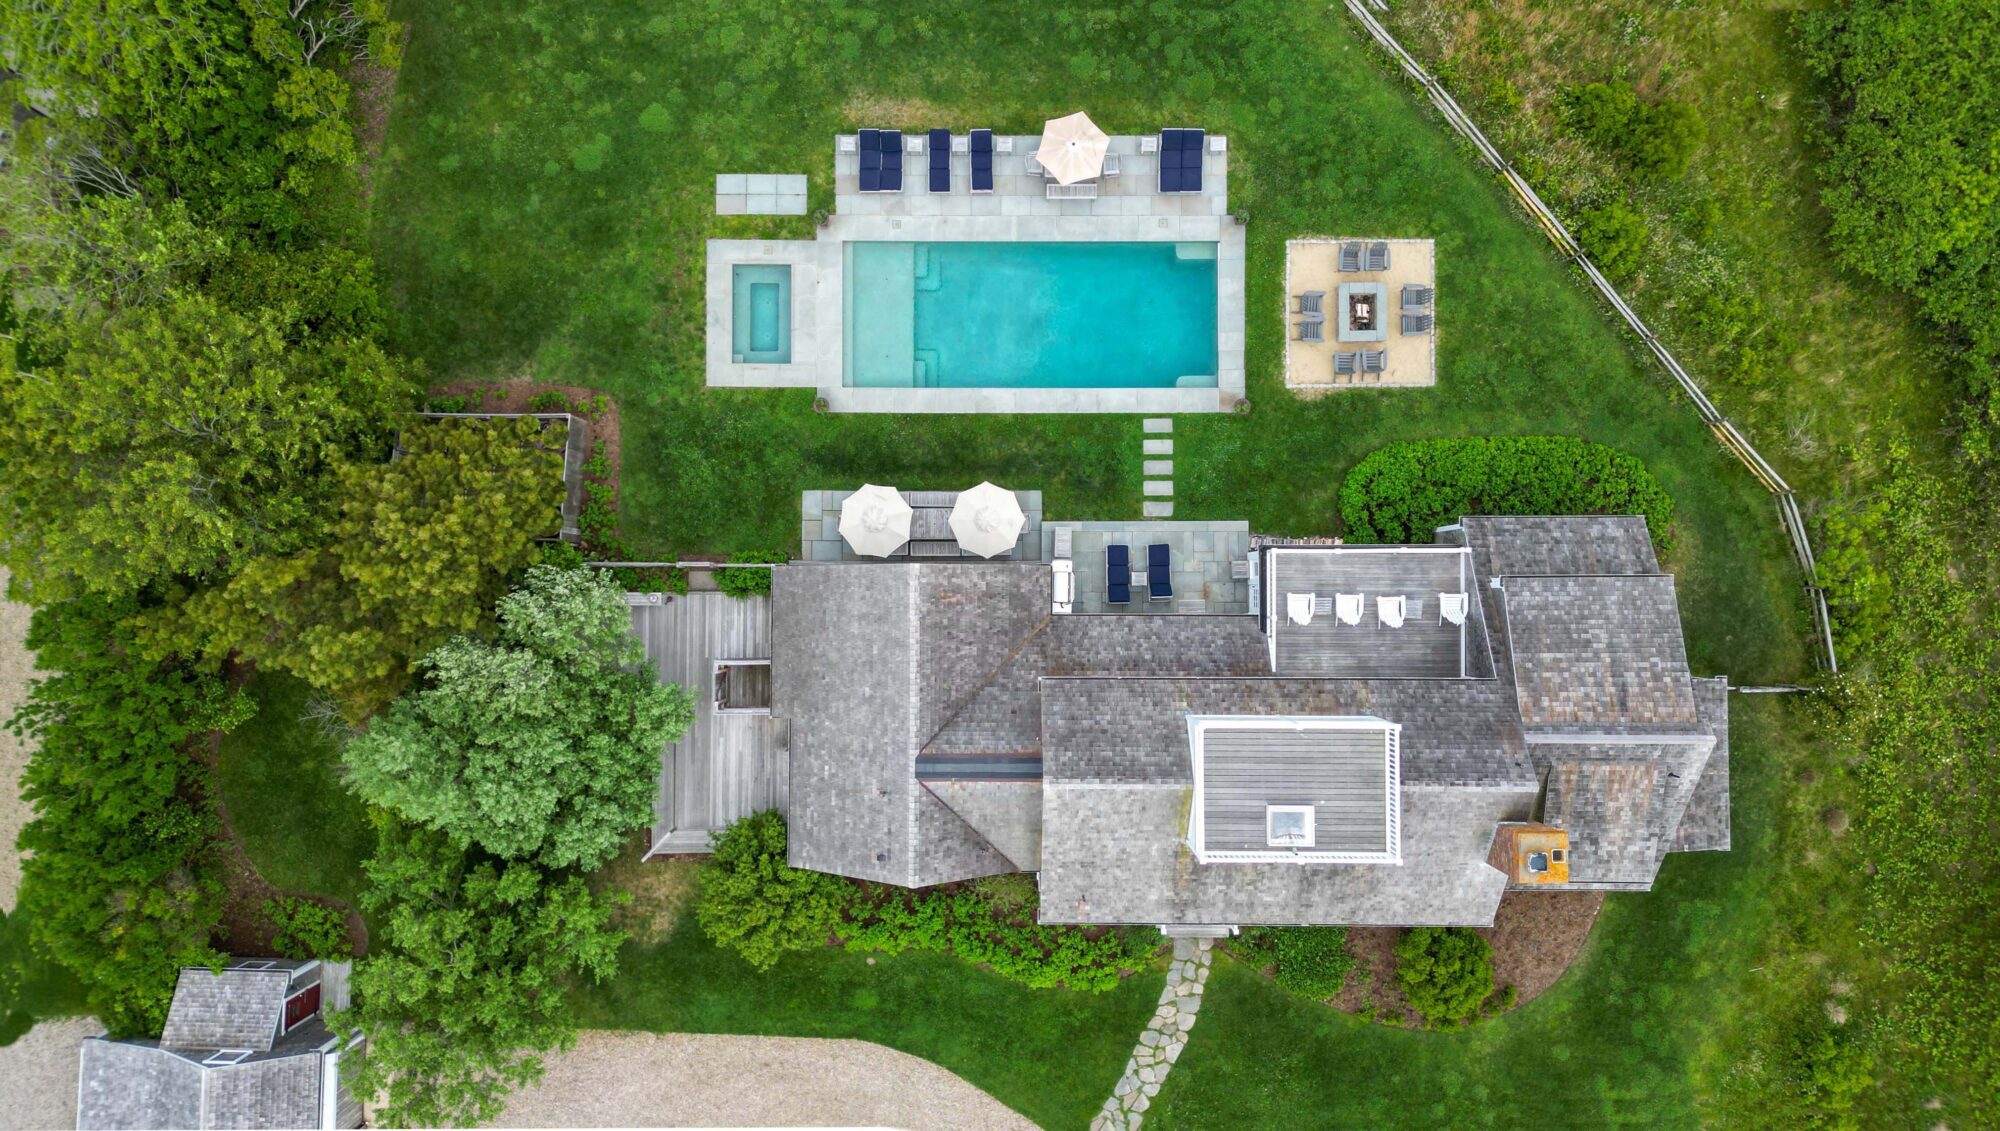 10-21 Quidnet Rd Nantucket Family Compound Tennis Pool Pickleball